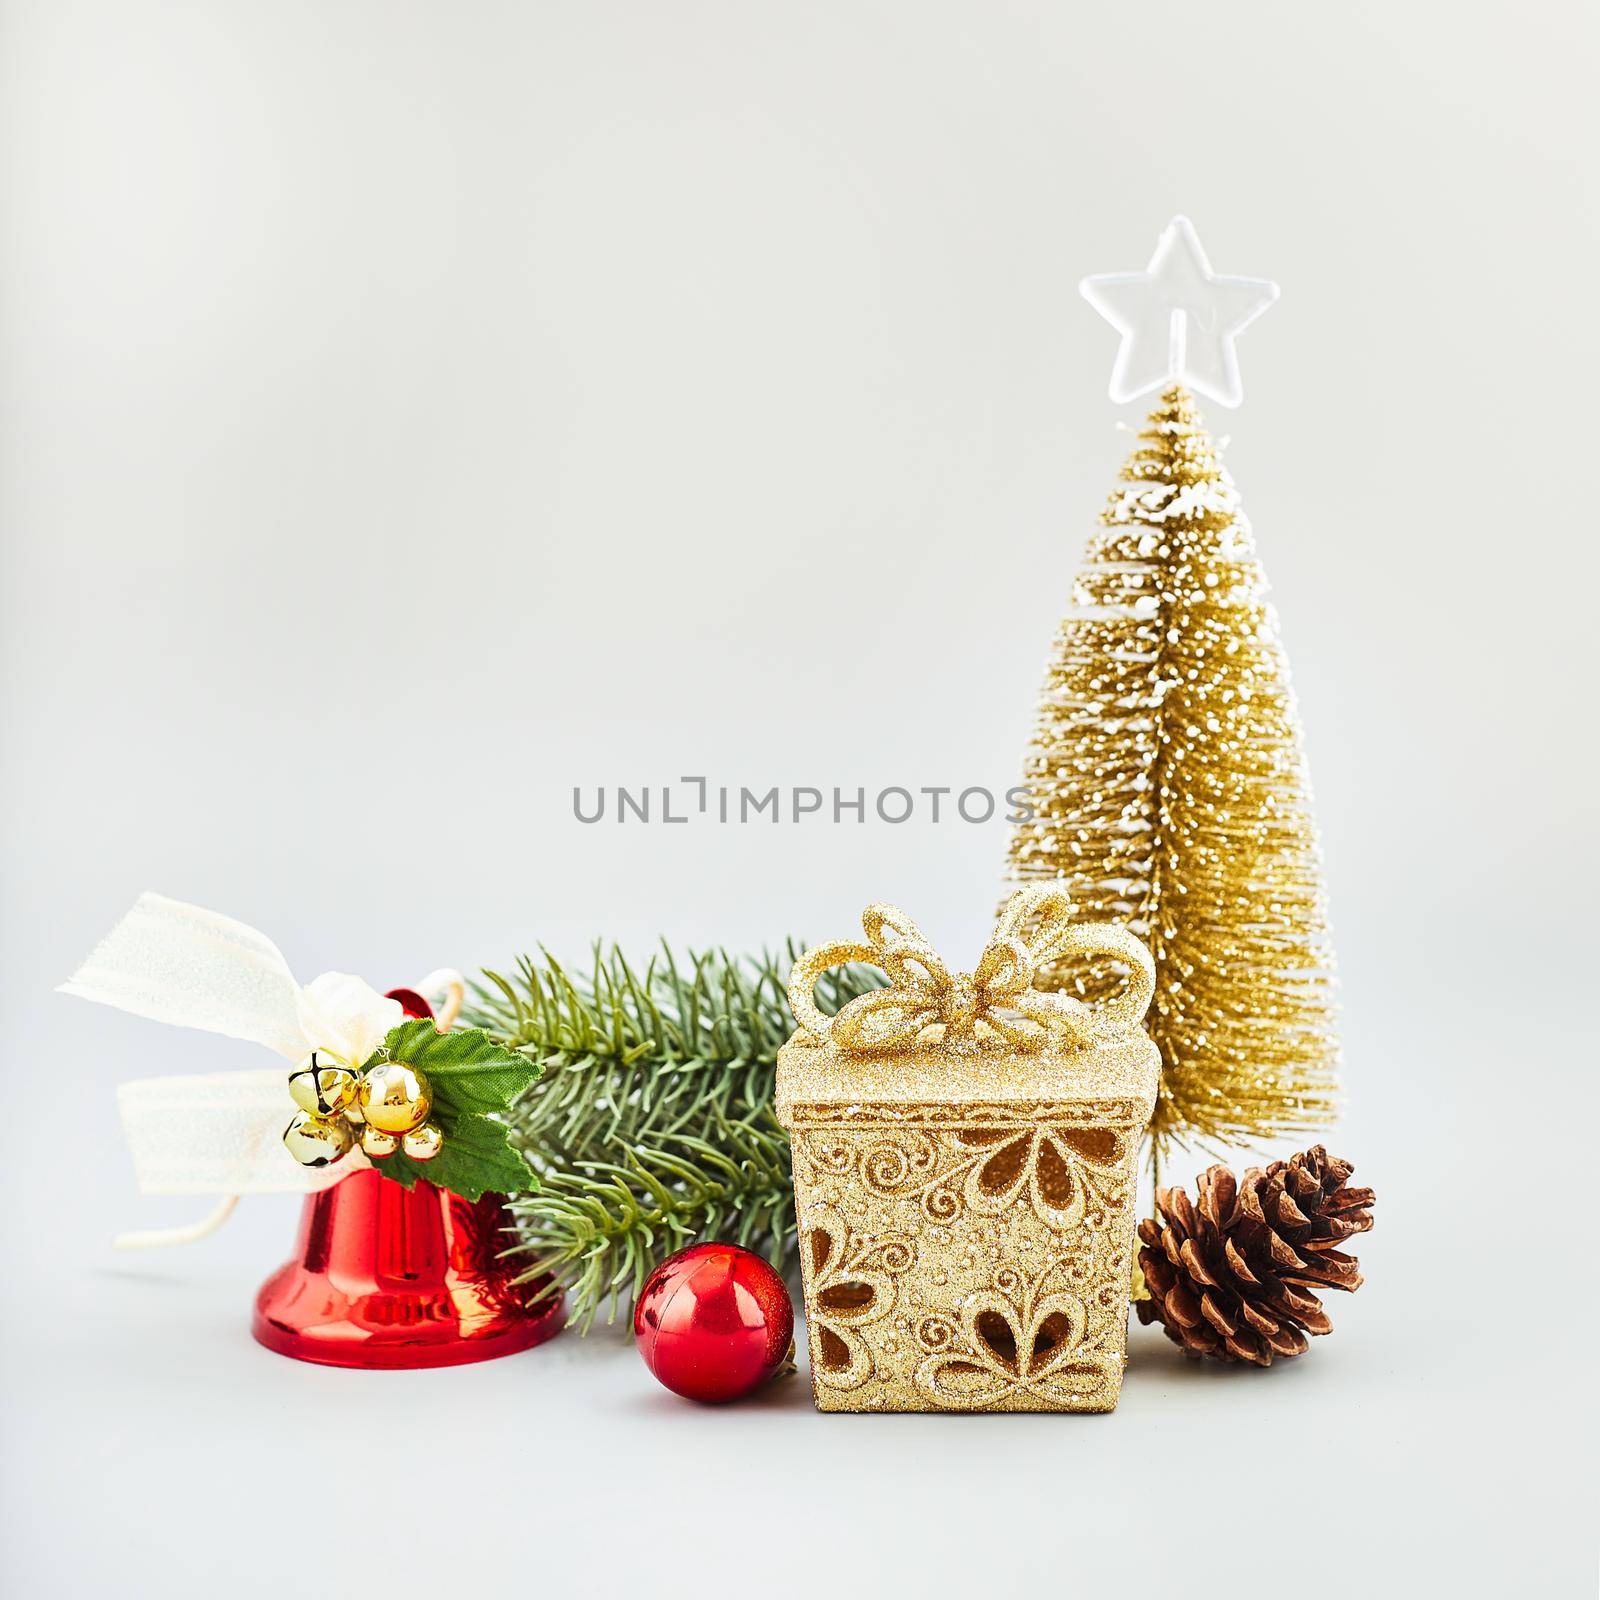 Christmas Decoration With Ornament And Defocused Lights . Abstract christmas lights on background.